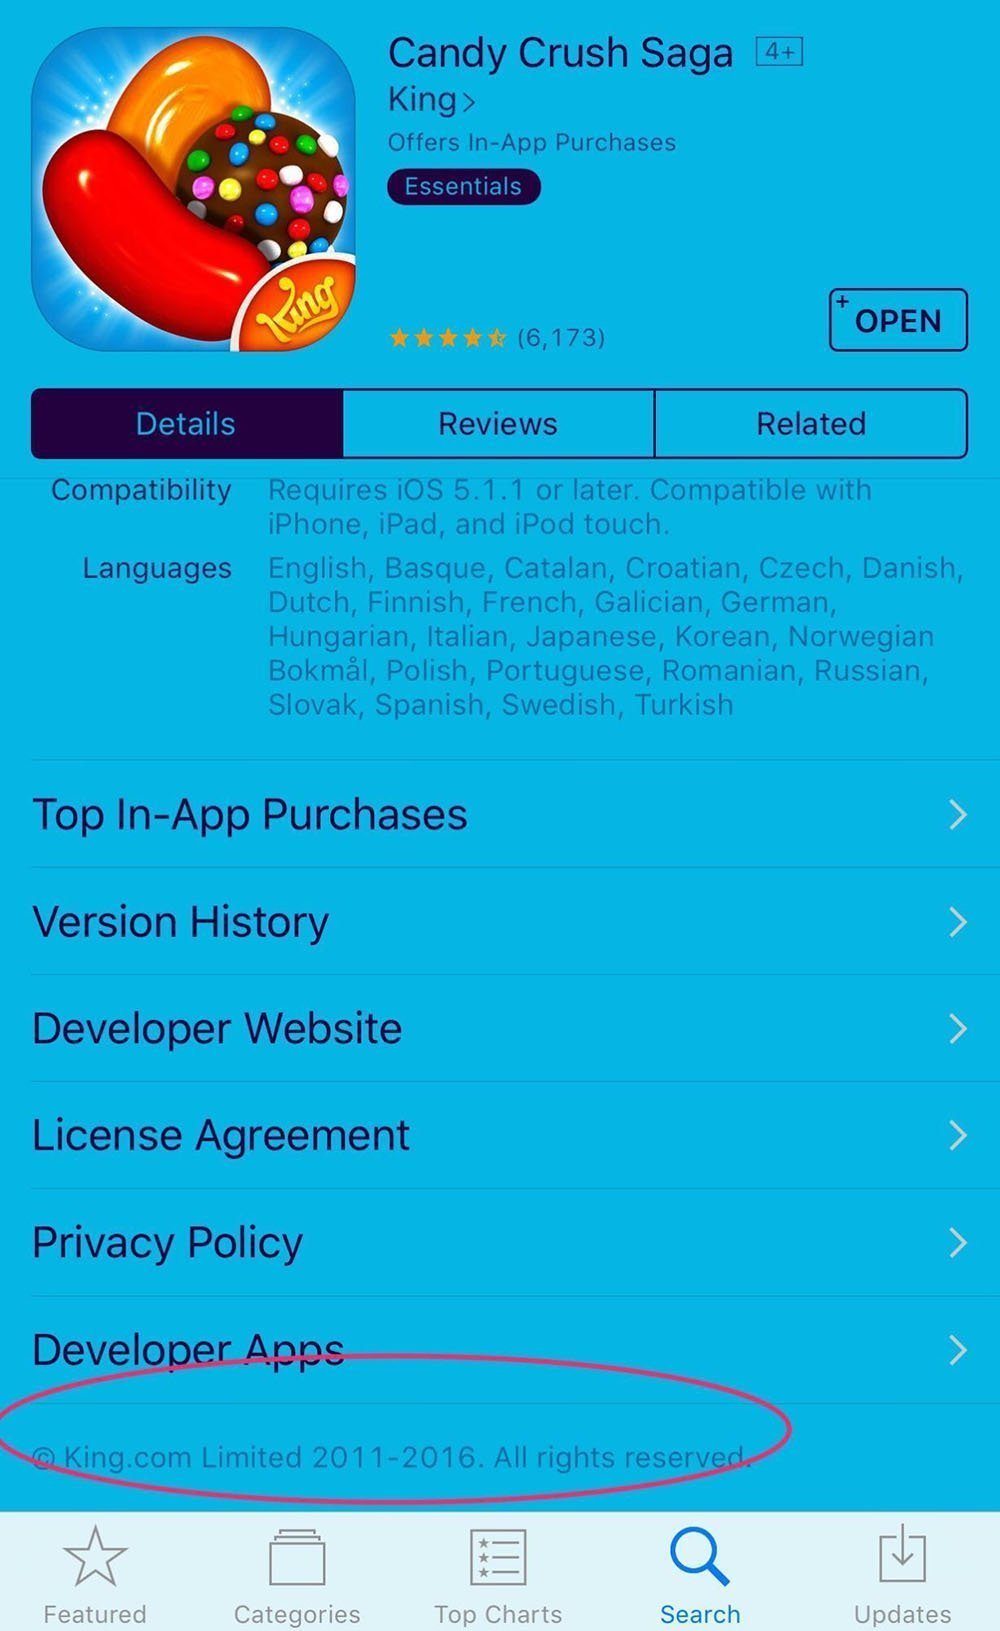 Candy Crush Saga mobile game on App Store: Copyright notice on profile page